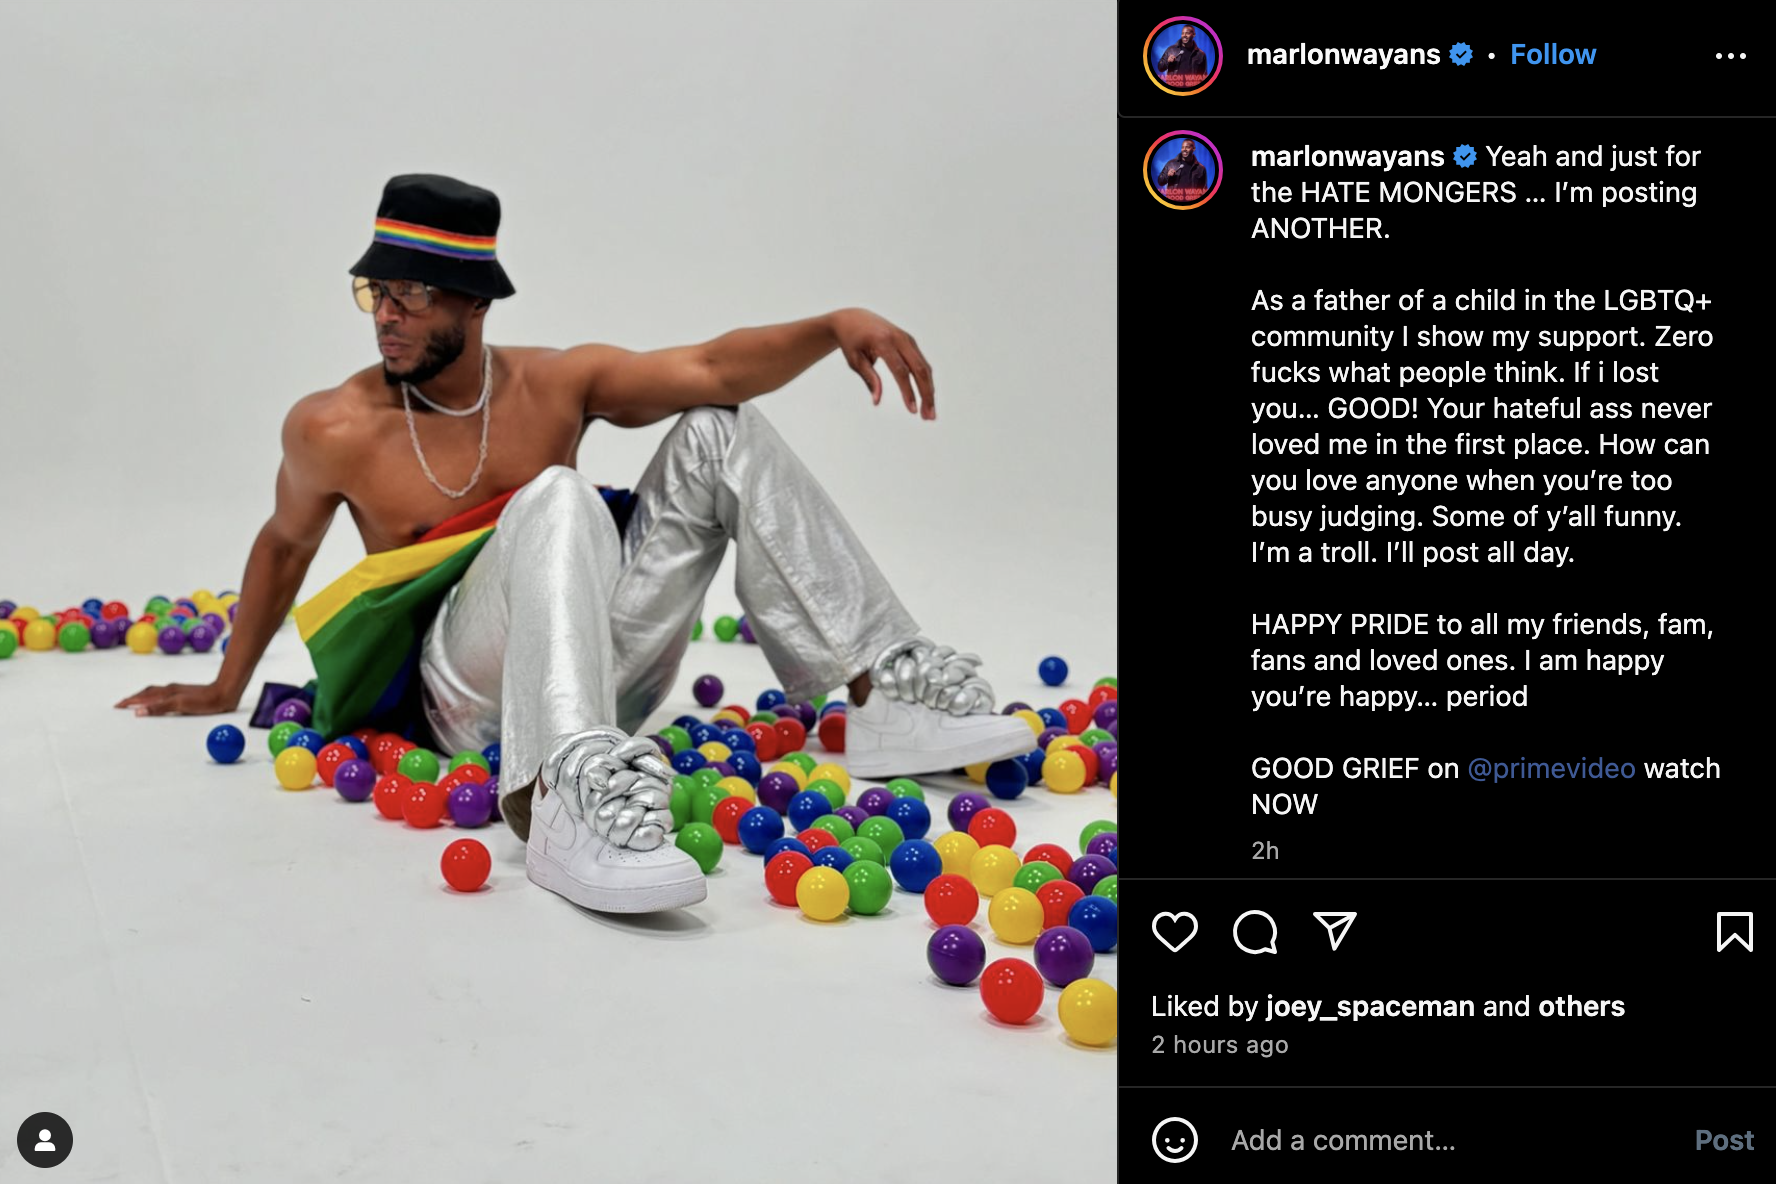 Marlon Wayans sits shirtless on the floor among colorful plastic balls, wearing white pants, silver shoes, and a multicolored hat. Instagram post caption mentions supporting the LGBTQ+ community